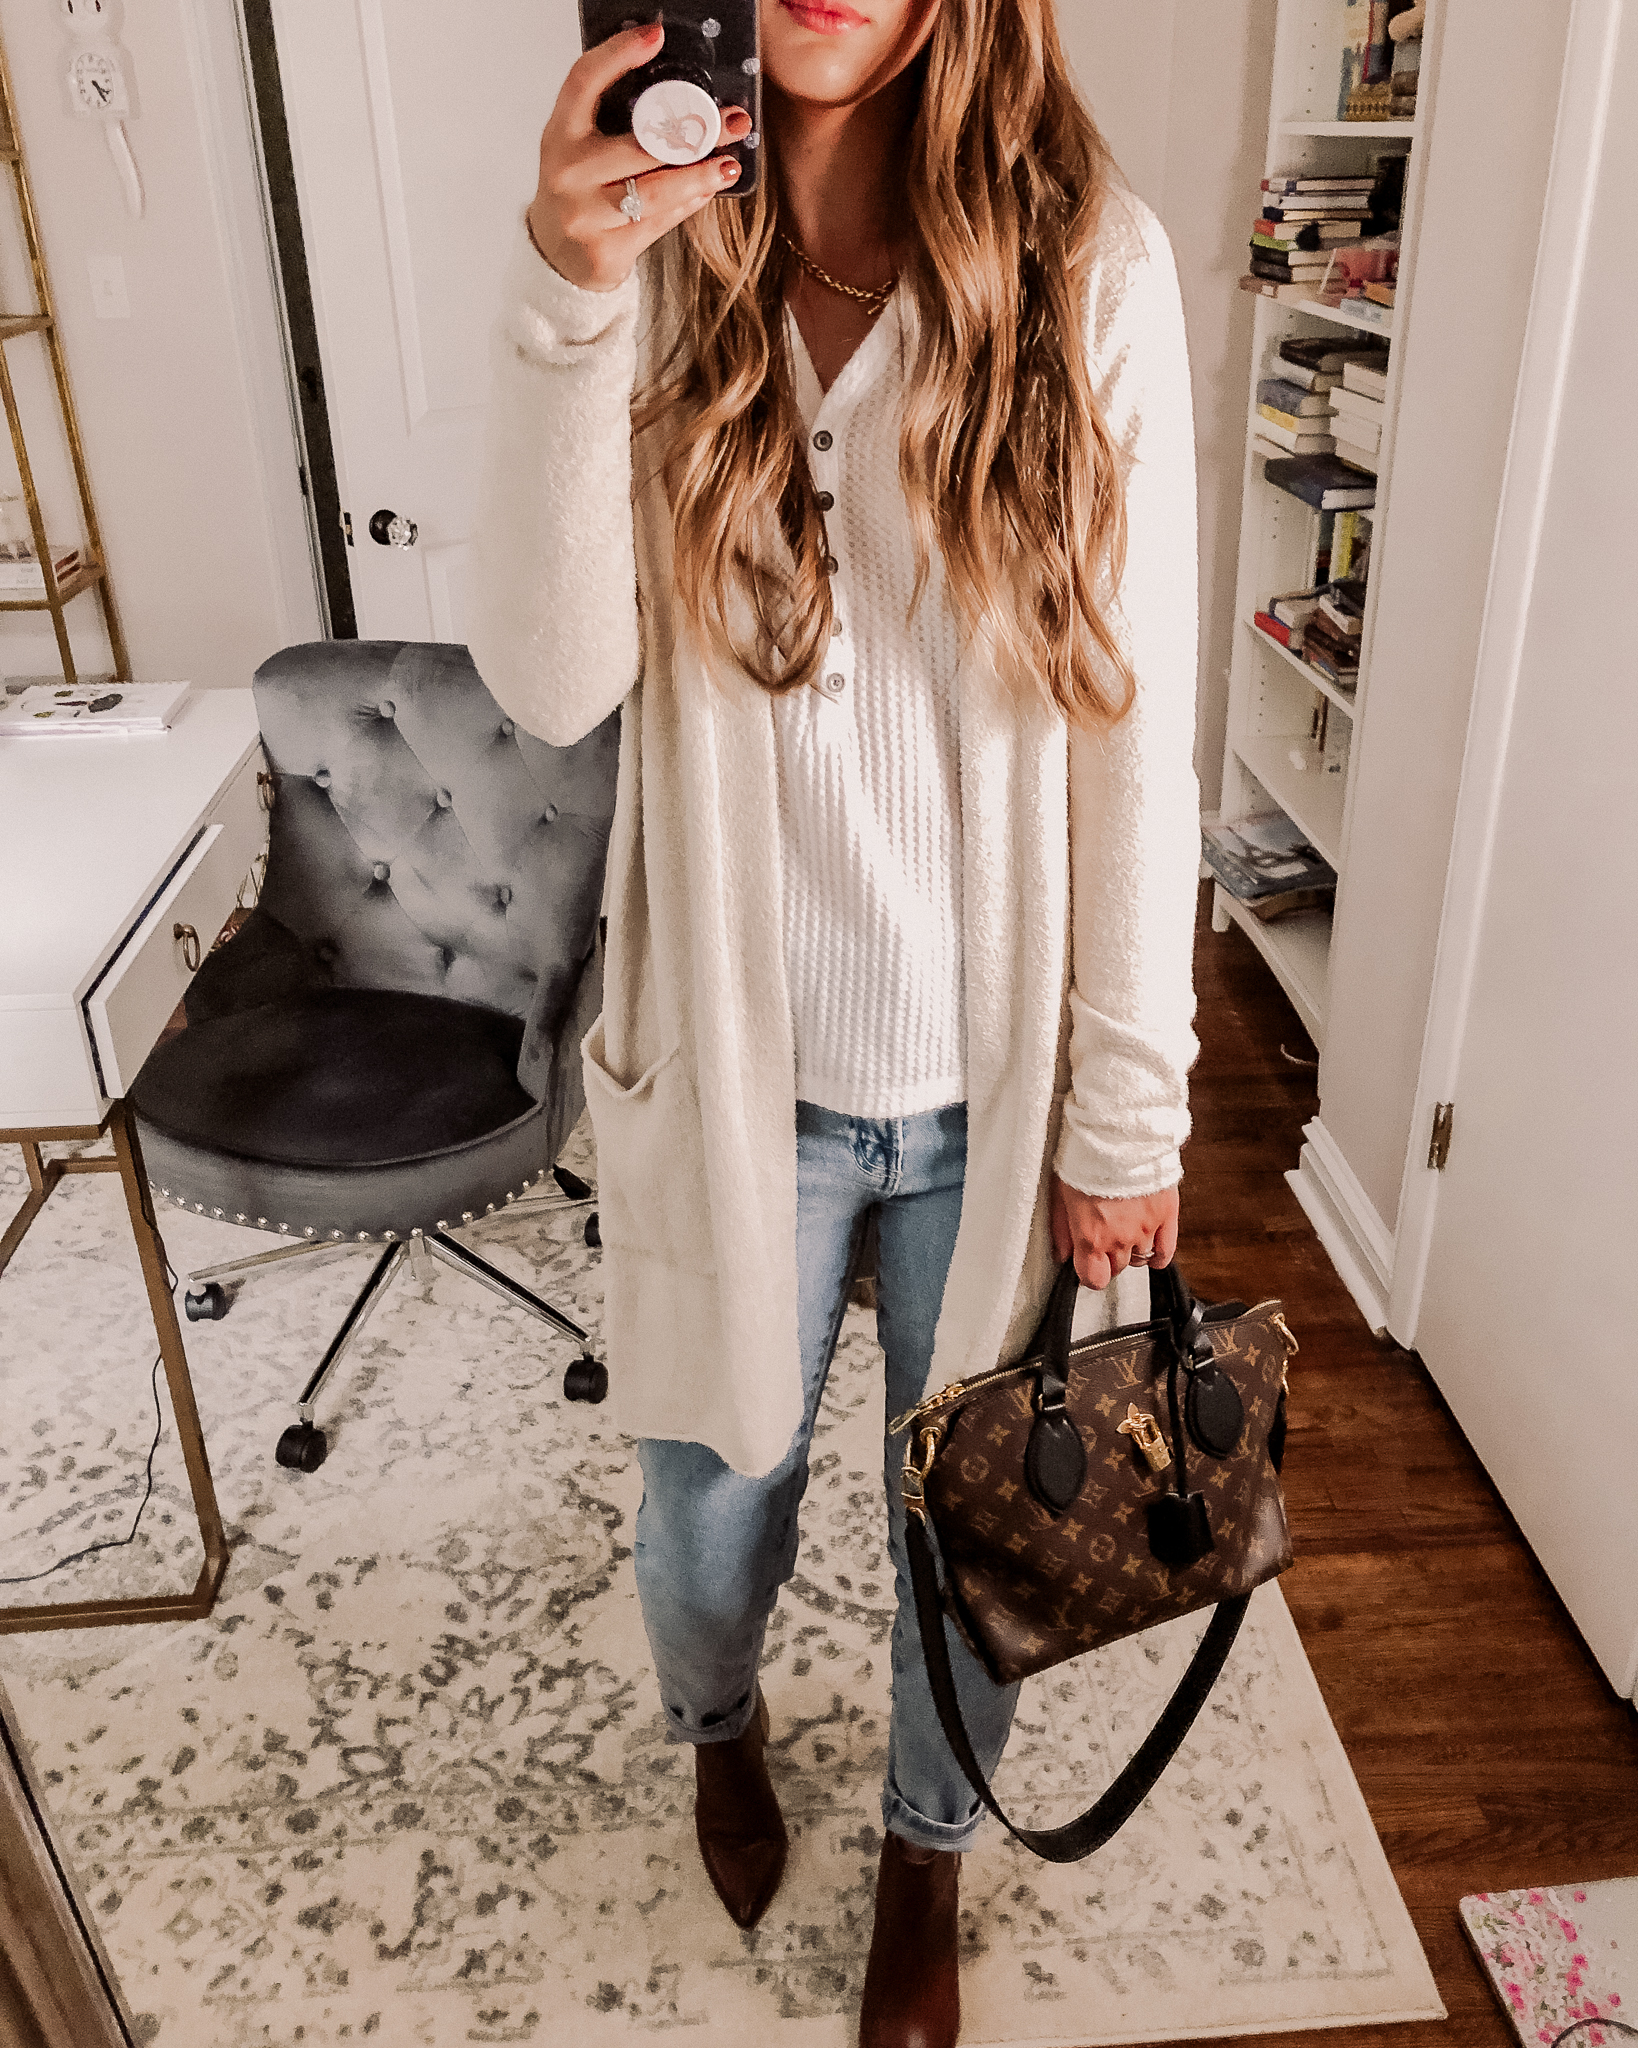 2020 Nordstrom Anniversary Sale Outfits